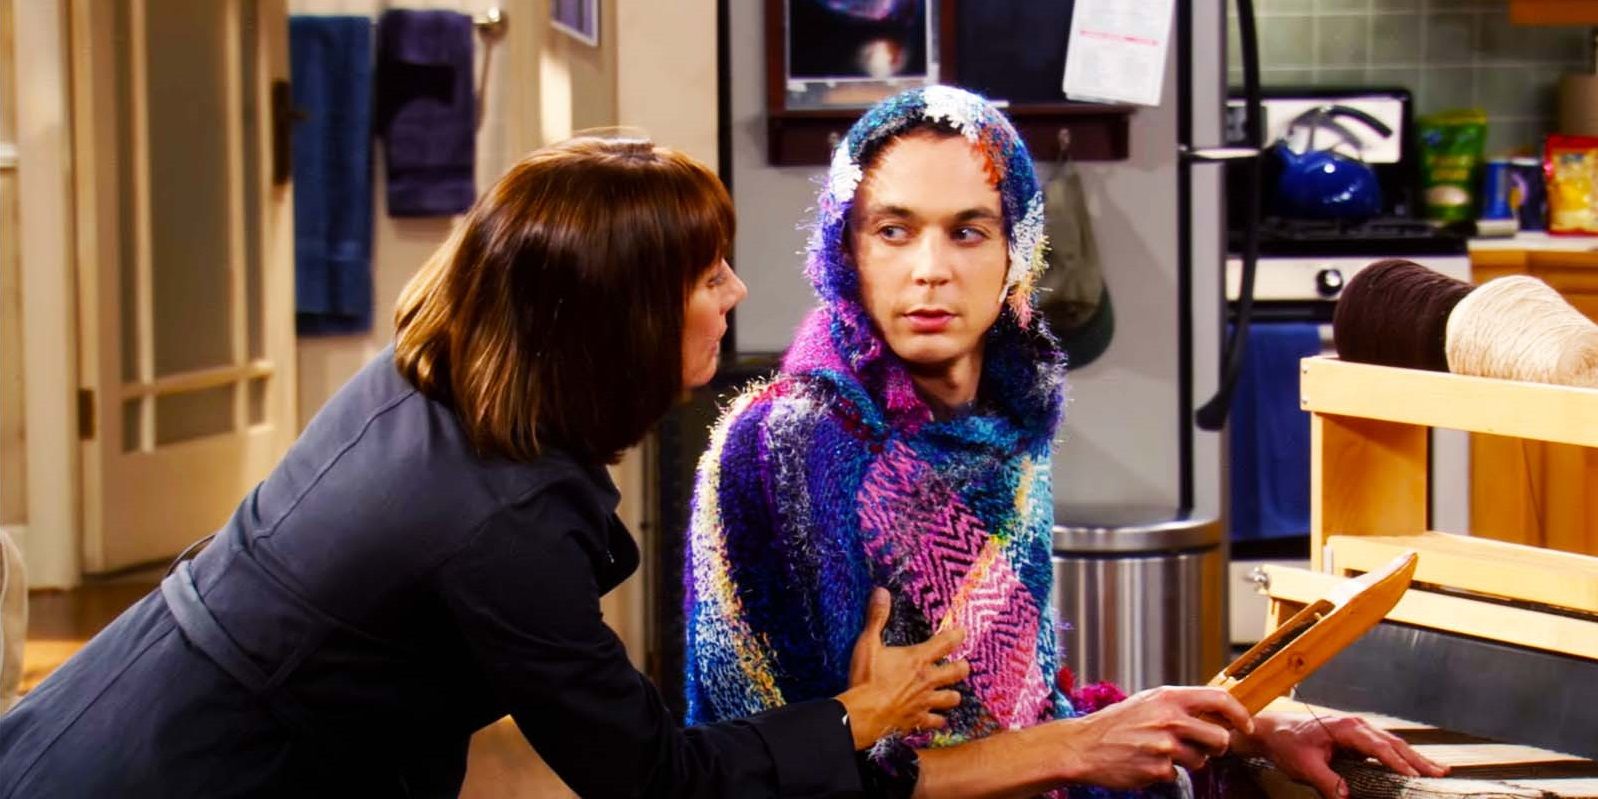 Laurie Metcalf as Mary Cooper and Jim Parsons as Sheldon Cooper in The Big Bang Theory Season 1, Episode 4-1